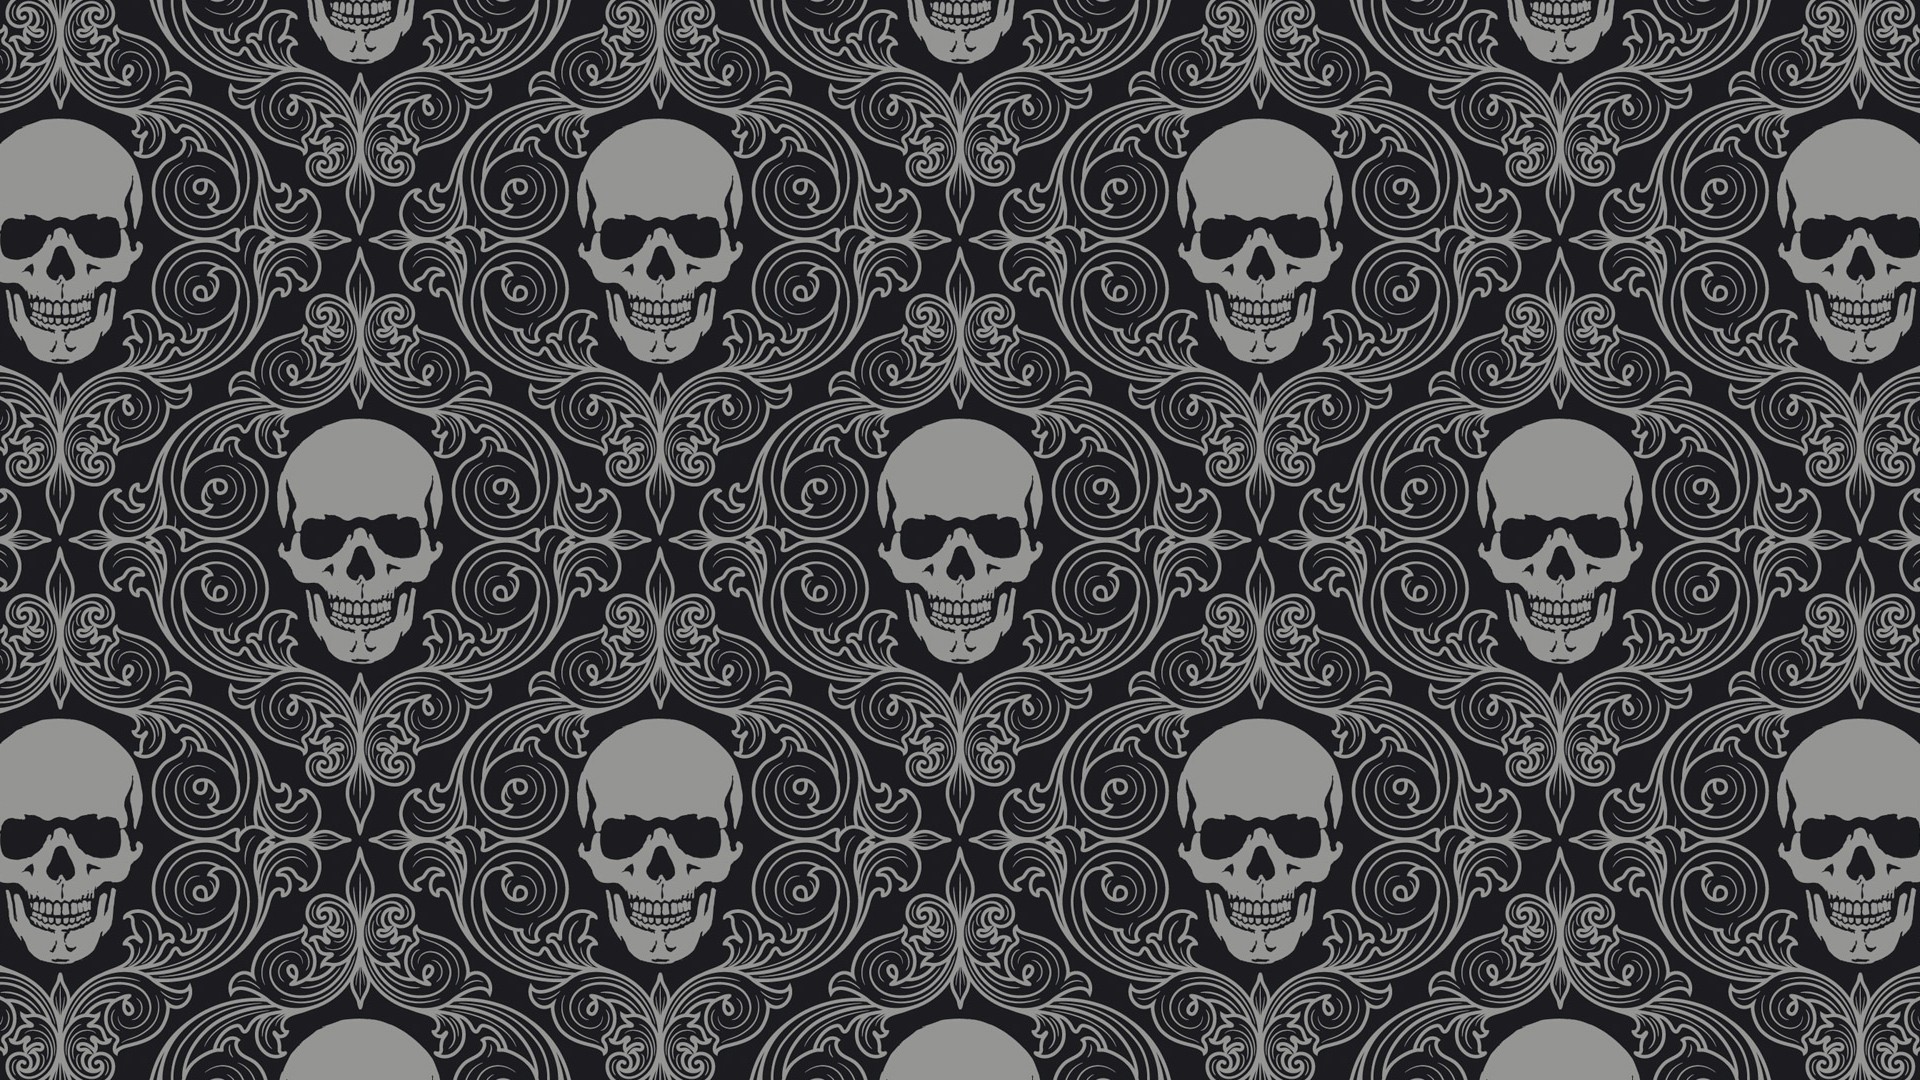 1920x1080 Skull Wallpaper High Quality Resolution Is Cool Wallpapers